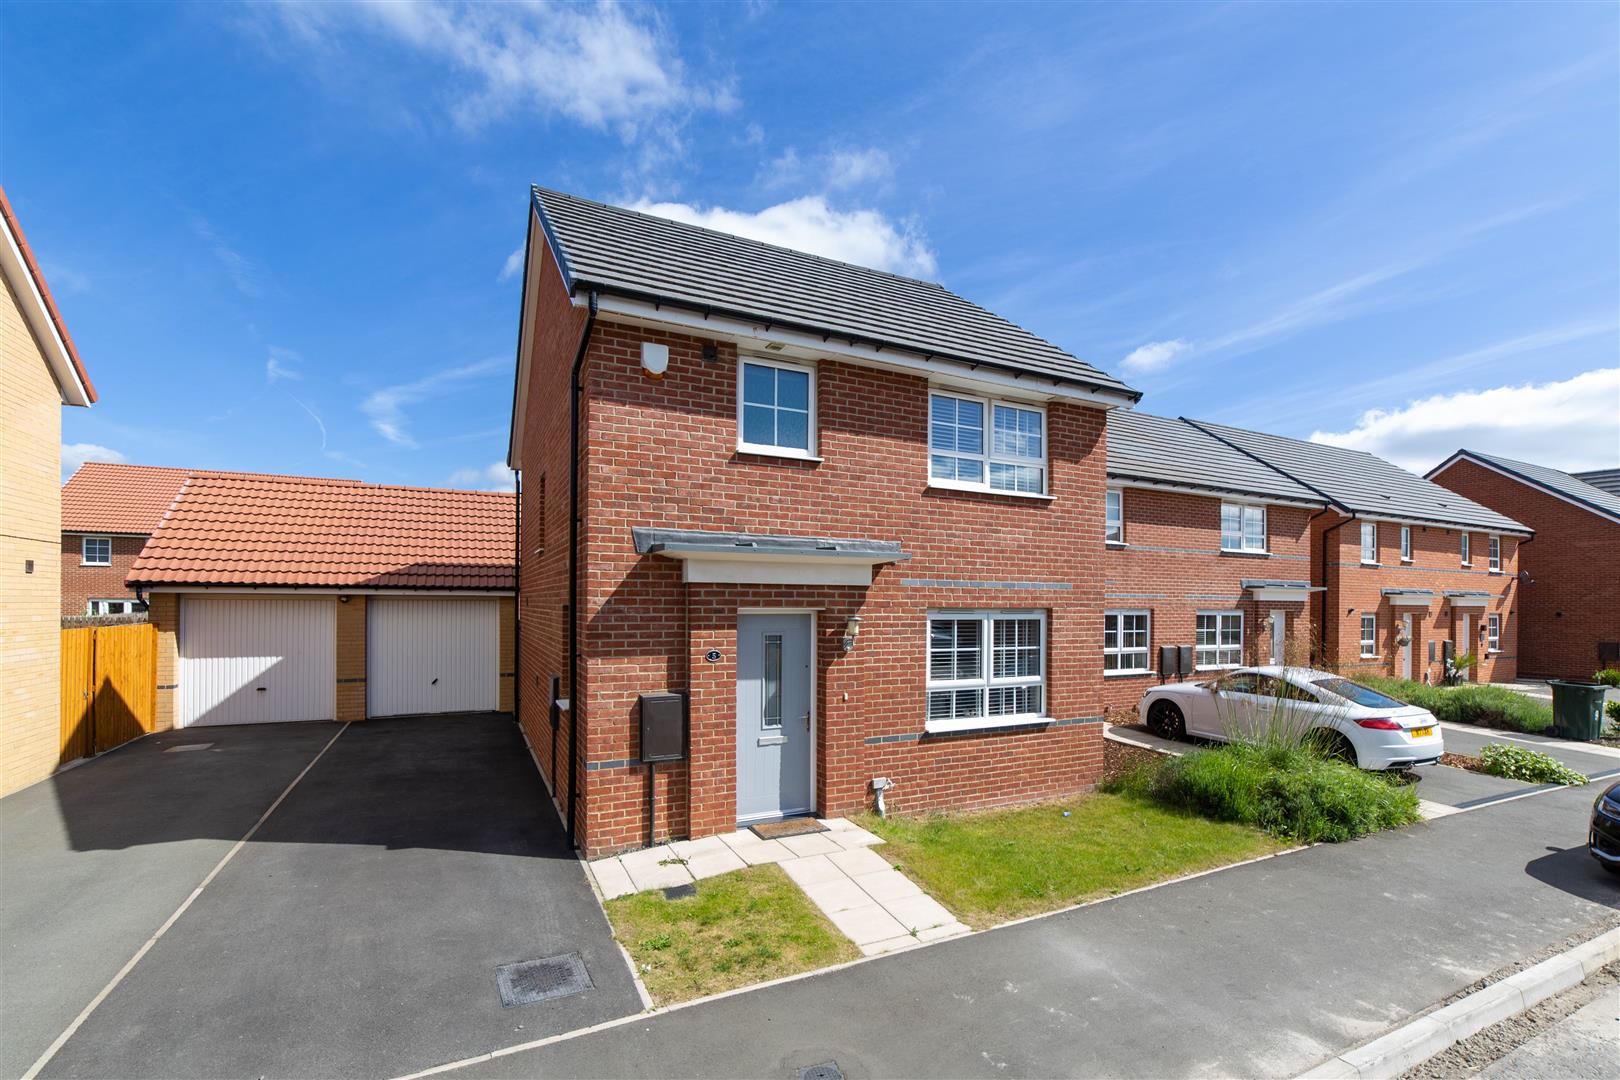 3 bed detached house for sale in Cheltenham Close, Newcastle Upon Tyne, NE13